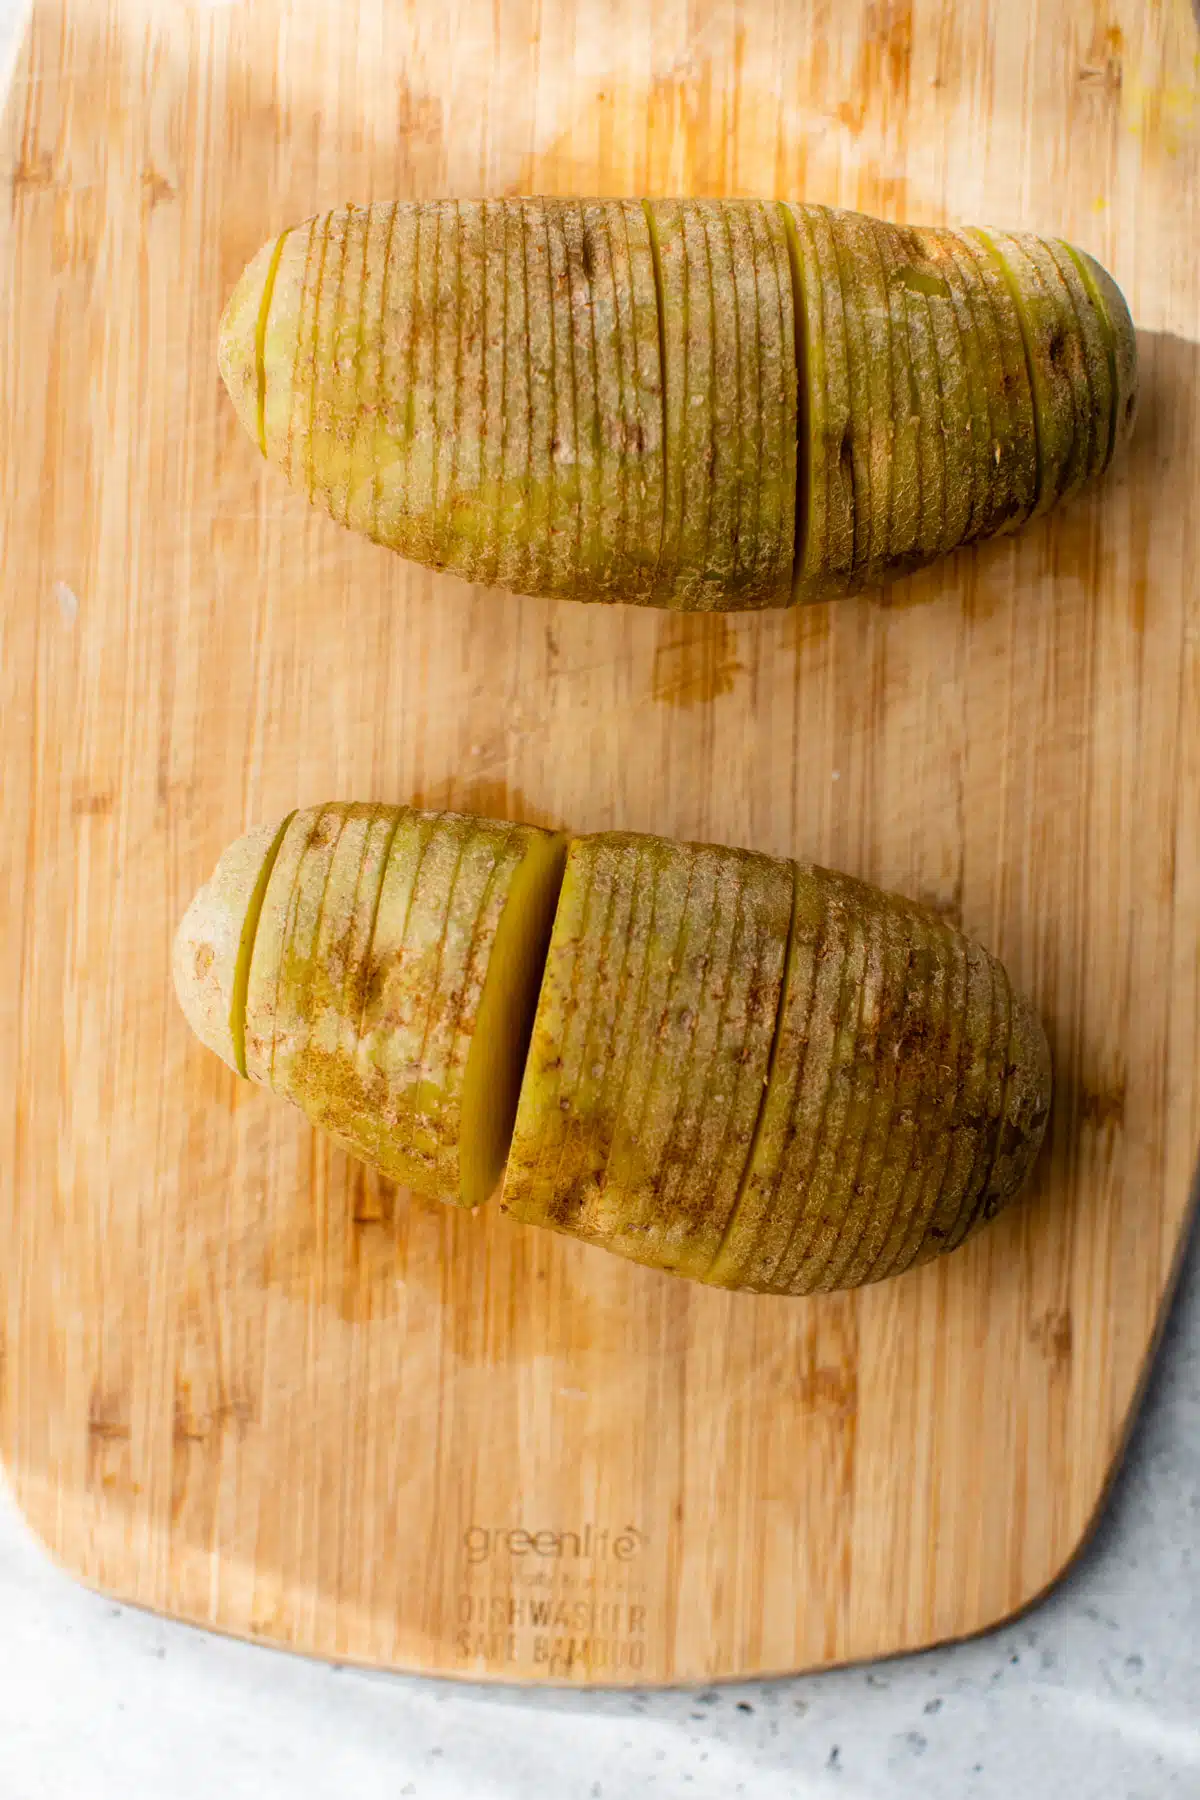 2 potatoes with slices though them on a cutting board